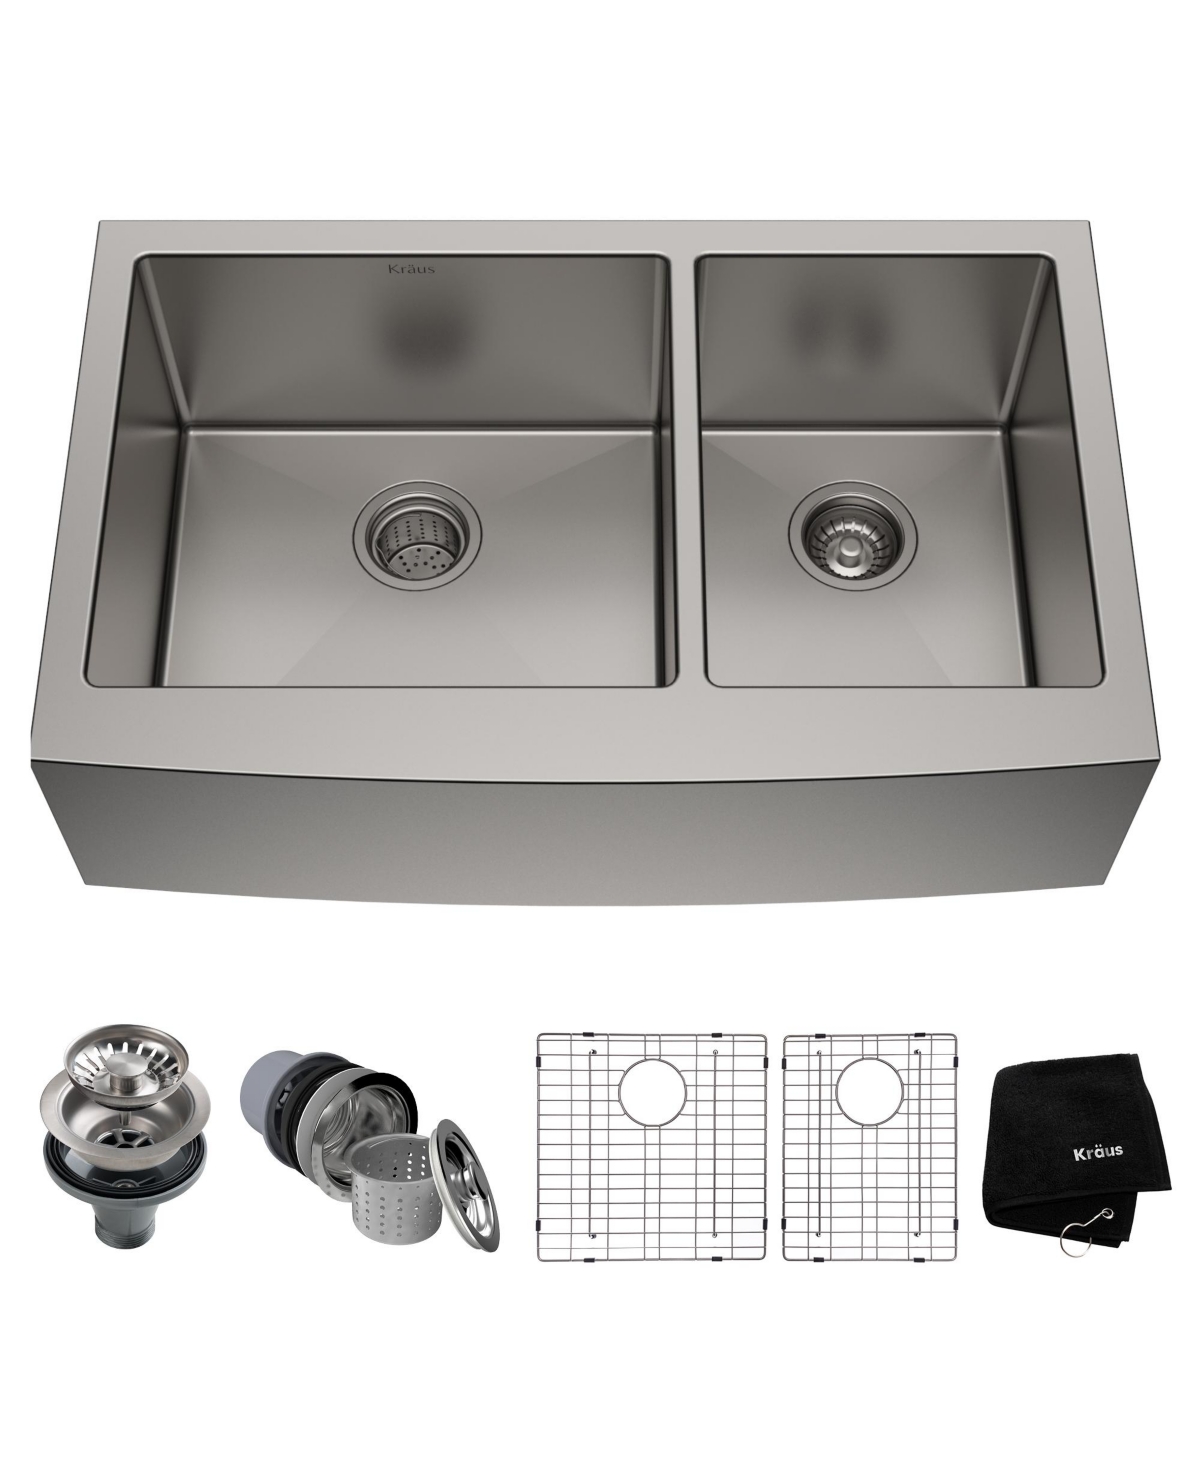 Standart Pro 33 in. 16 Gauge 60/40 Double Bowl Stainless Steel Farmhouse Kitchen Sink - Stainless steel